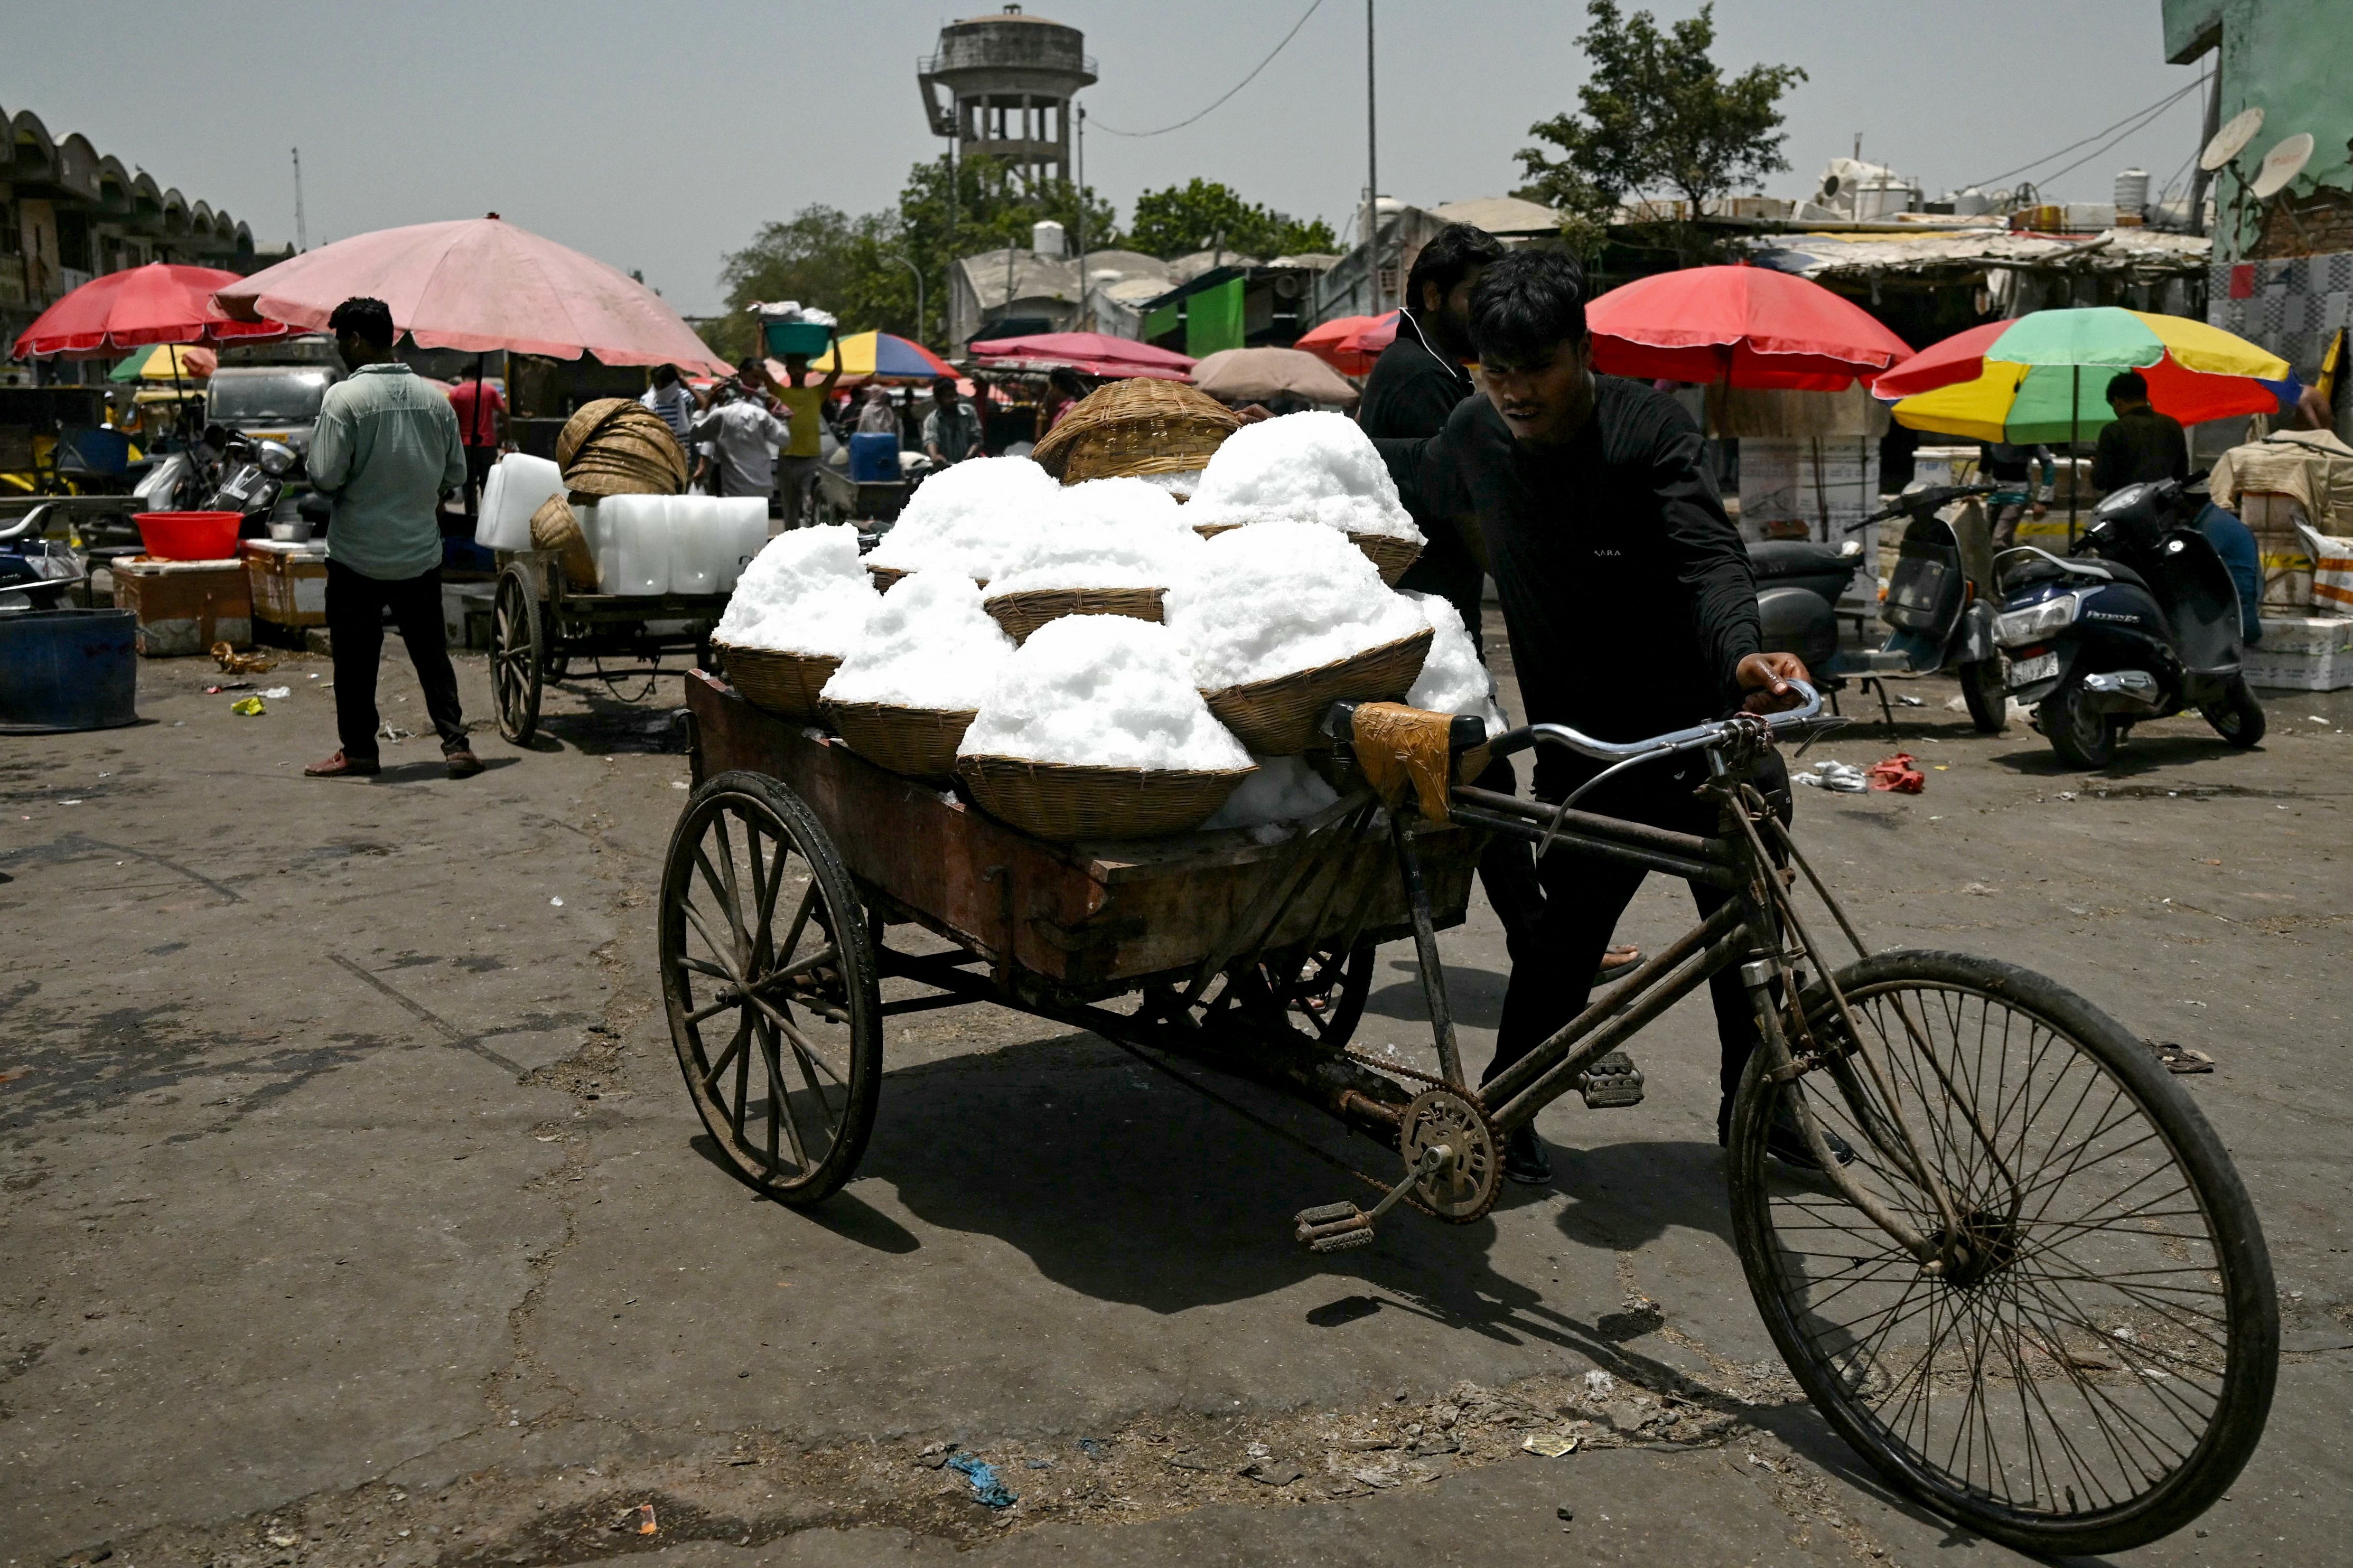 On a hot summer afternoon, a worker carries baskets of shaved ice into a food processing facility at a market in Delhi.